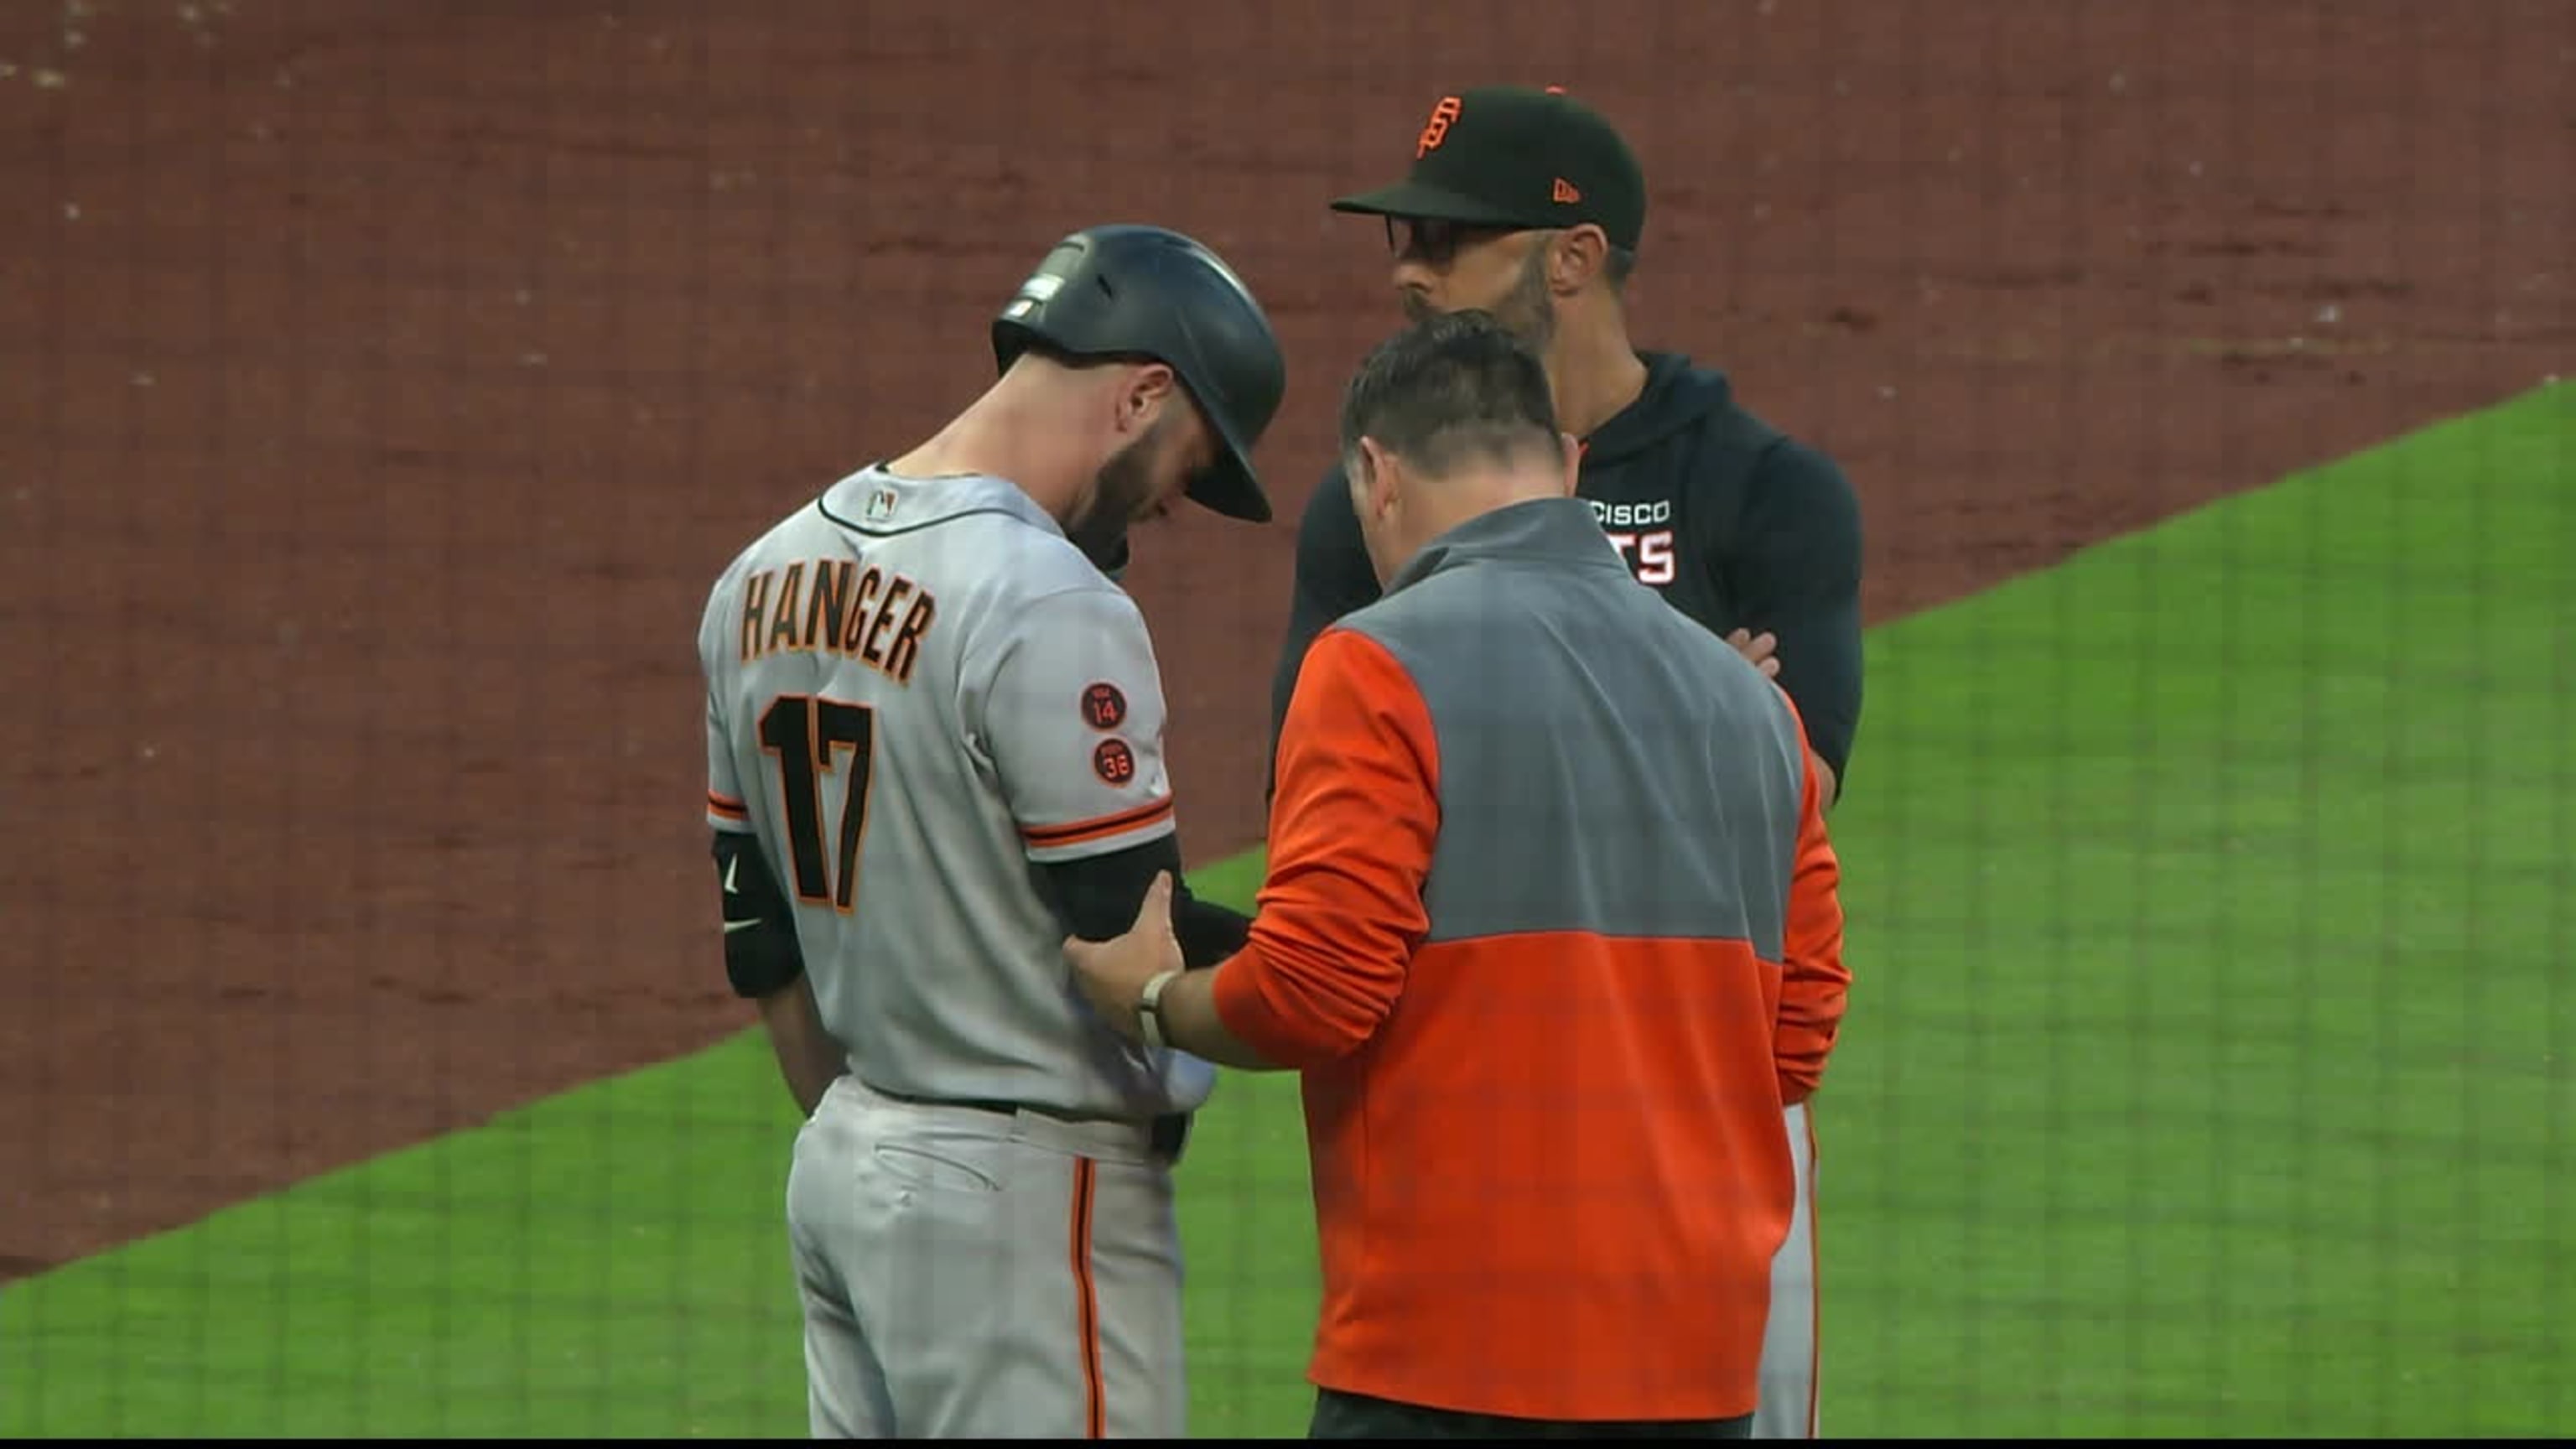 Mitch Haniger starting for Giants Monday night